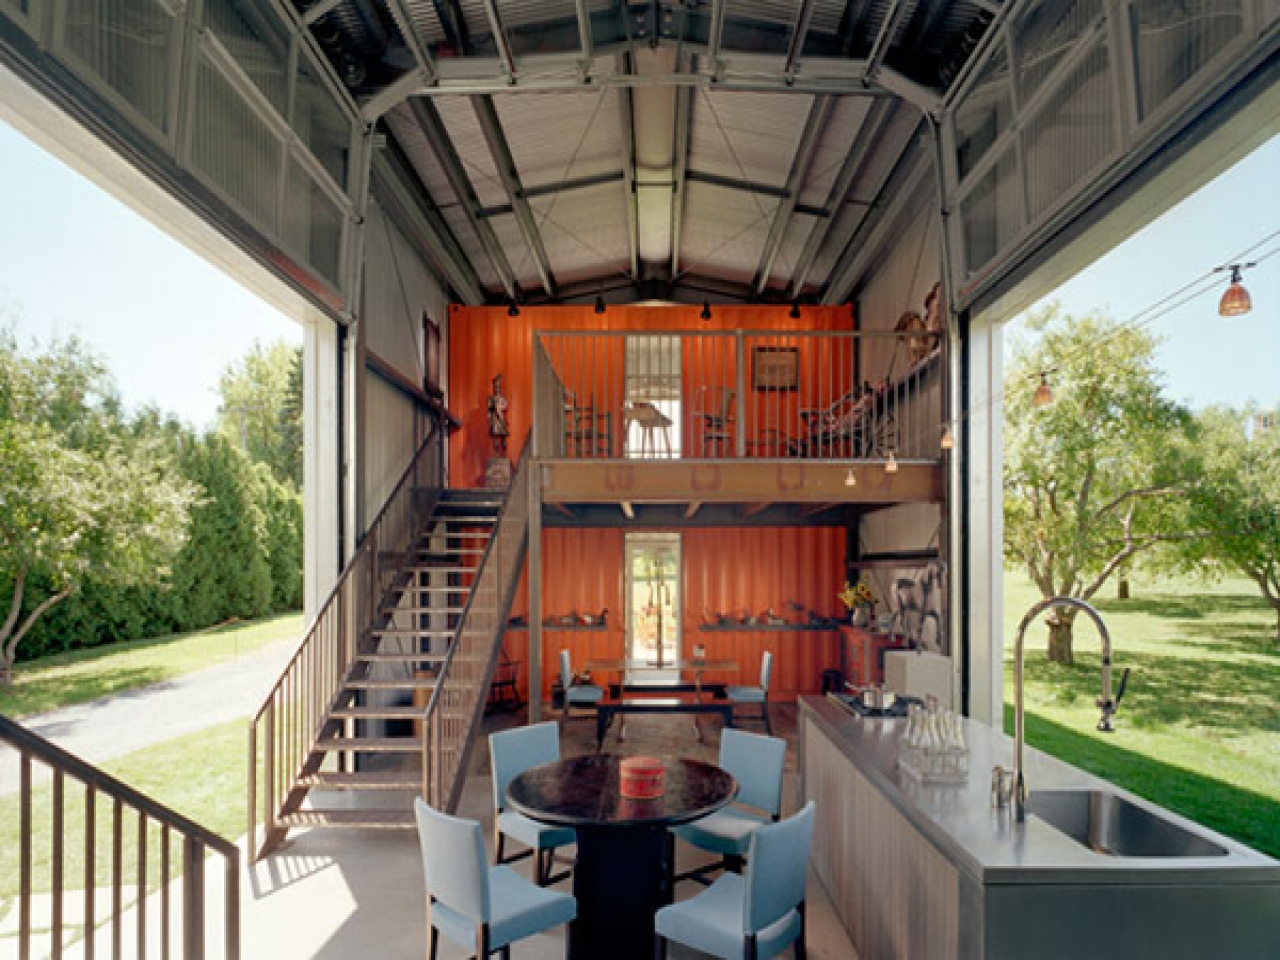 50 Best Shipping Container Home Ideas for 2021